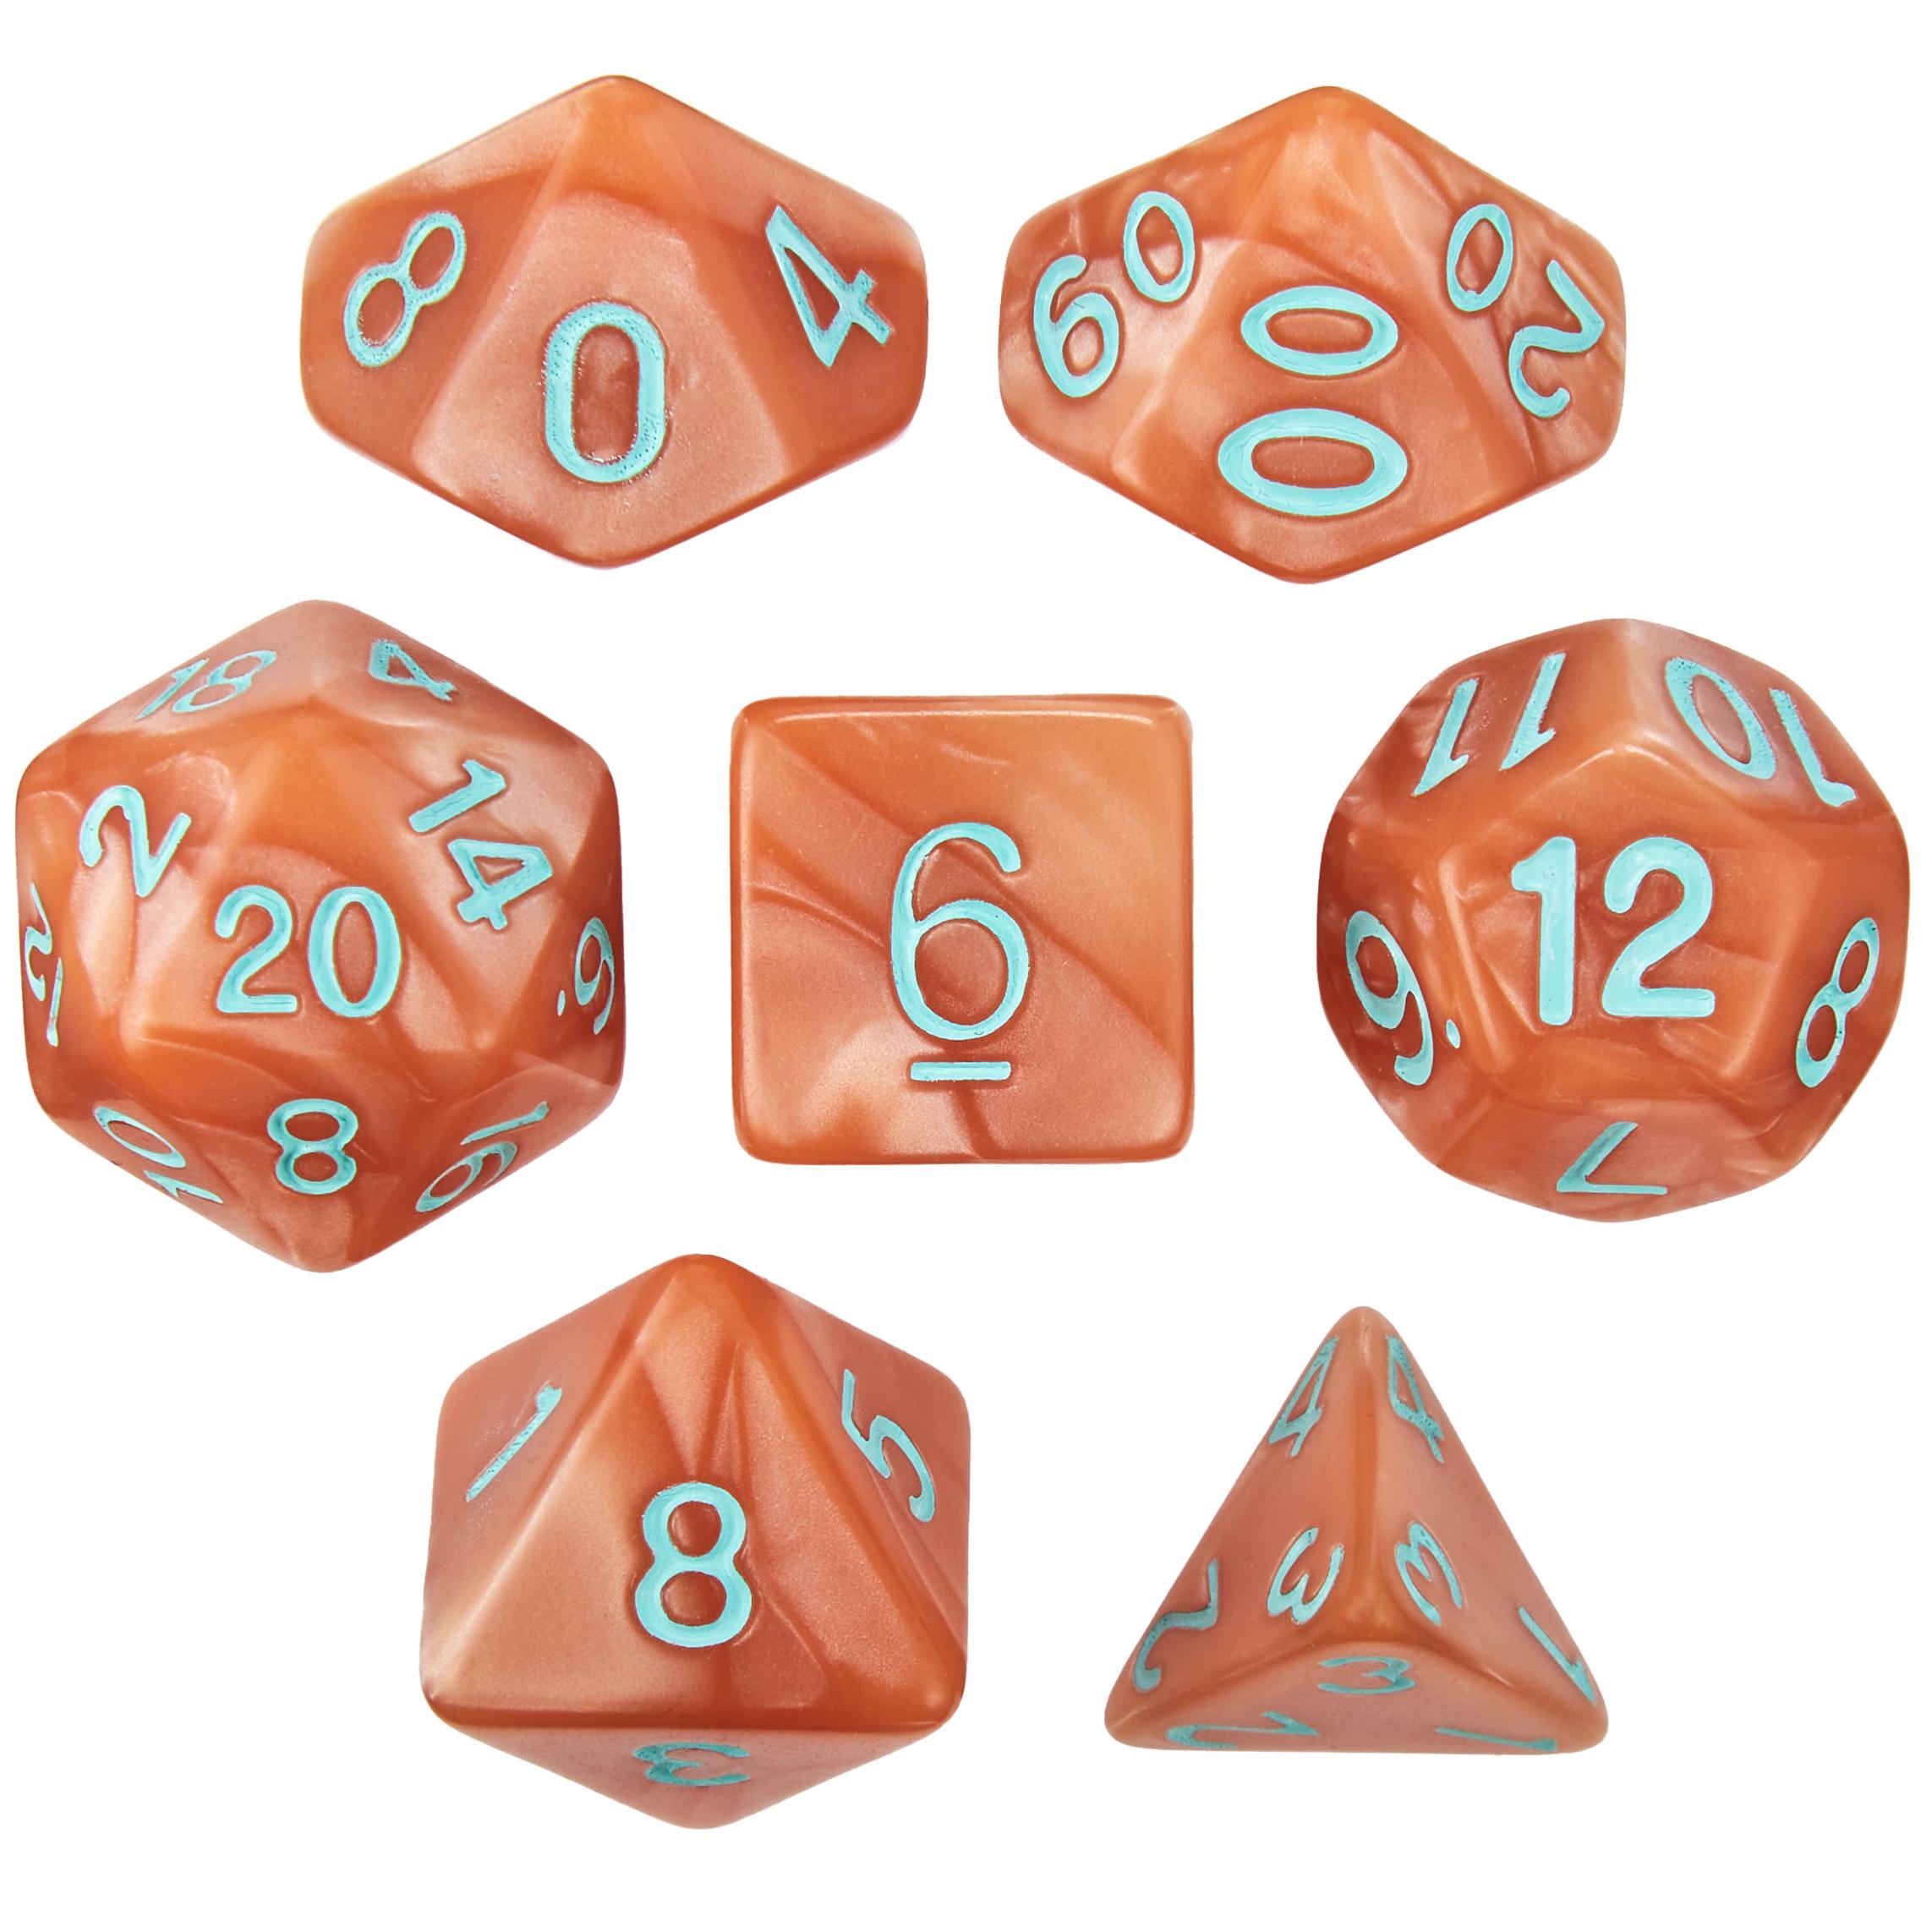 Set of 7 Dice - Precursor's Legacy - Pearlized Copper with Green Paint